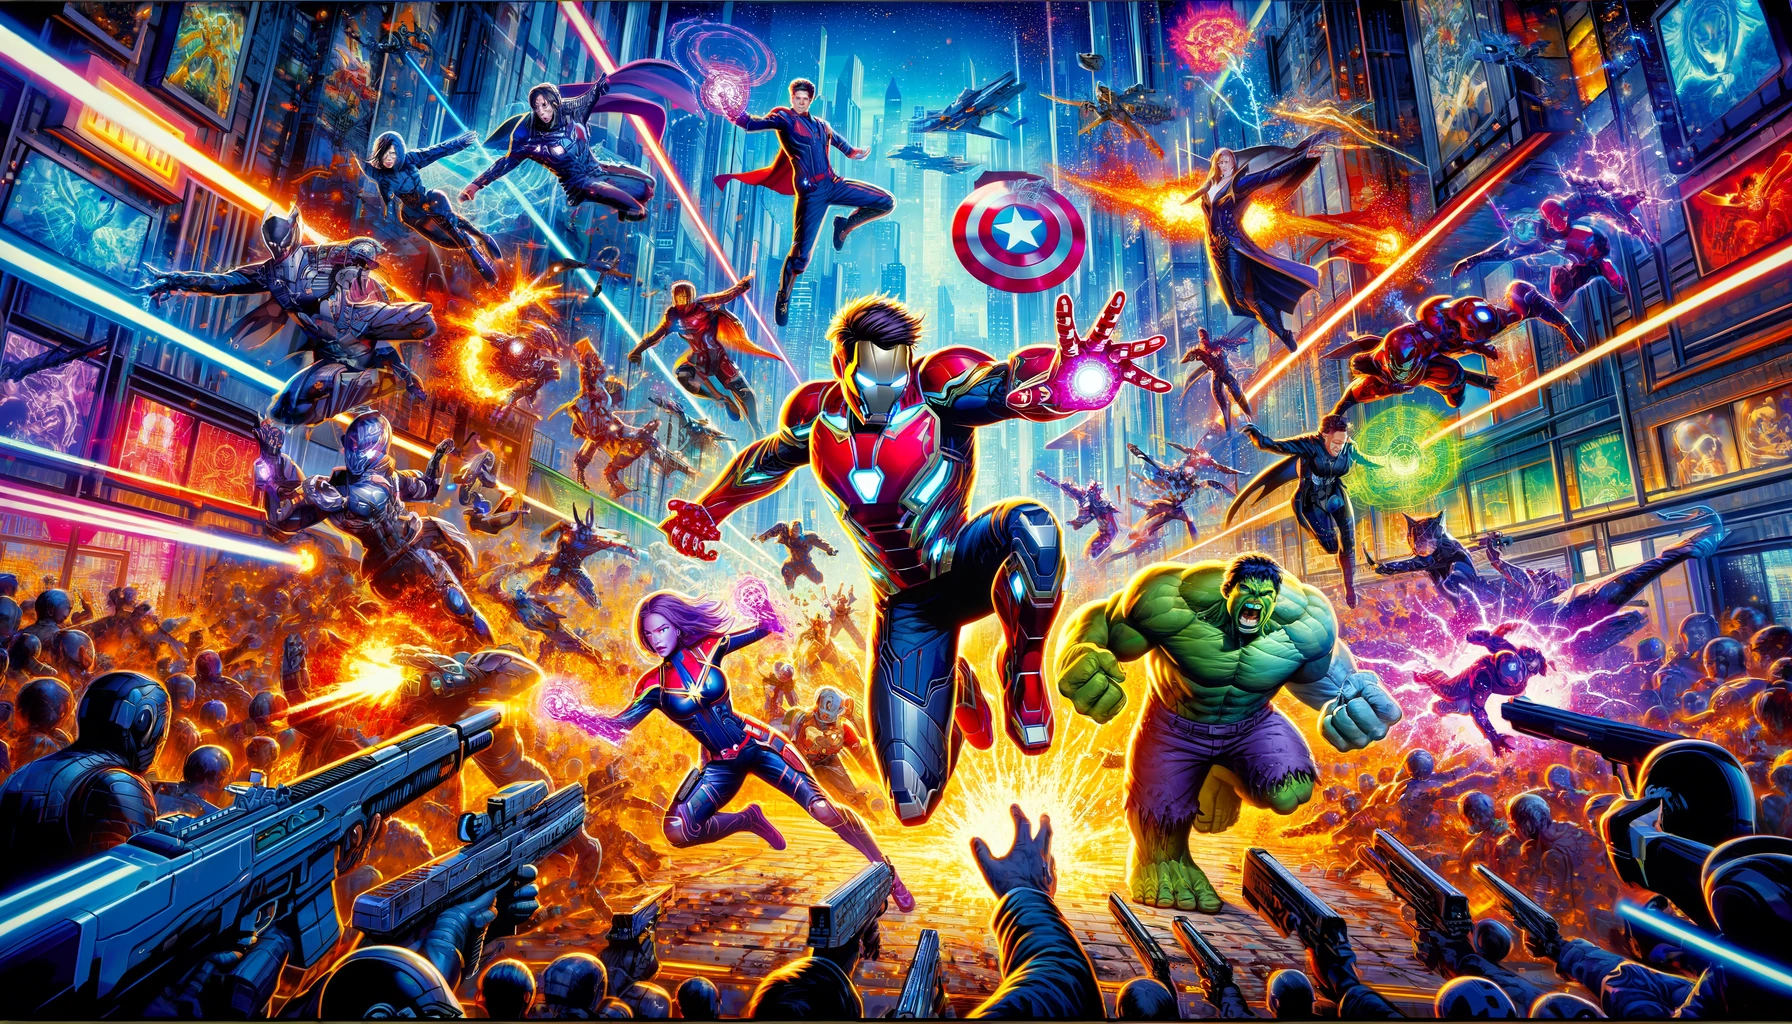 A vibrant and detailed illustration of a dynamic battle scene in Marvel Snap, featuring various Marvel characters in action against a futuristic cityscape with towering buildings and neon lights.